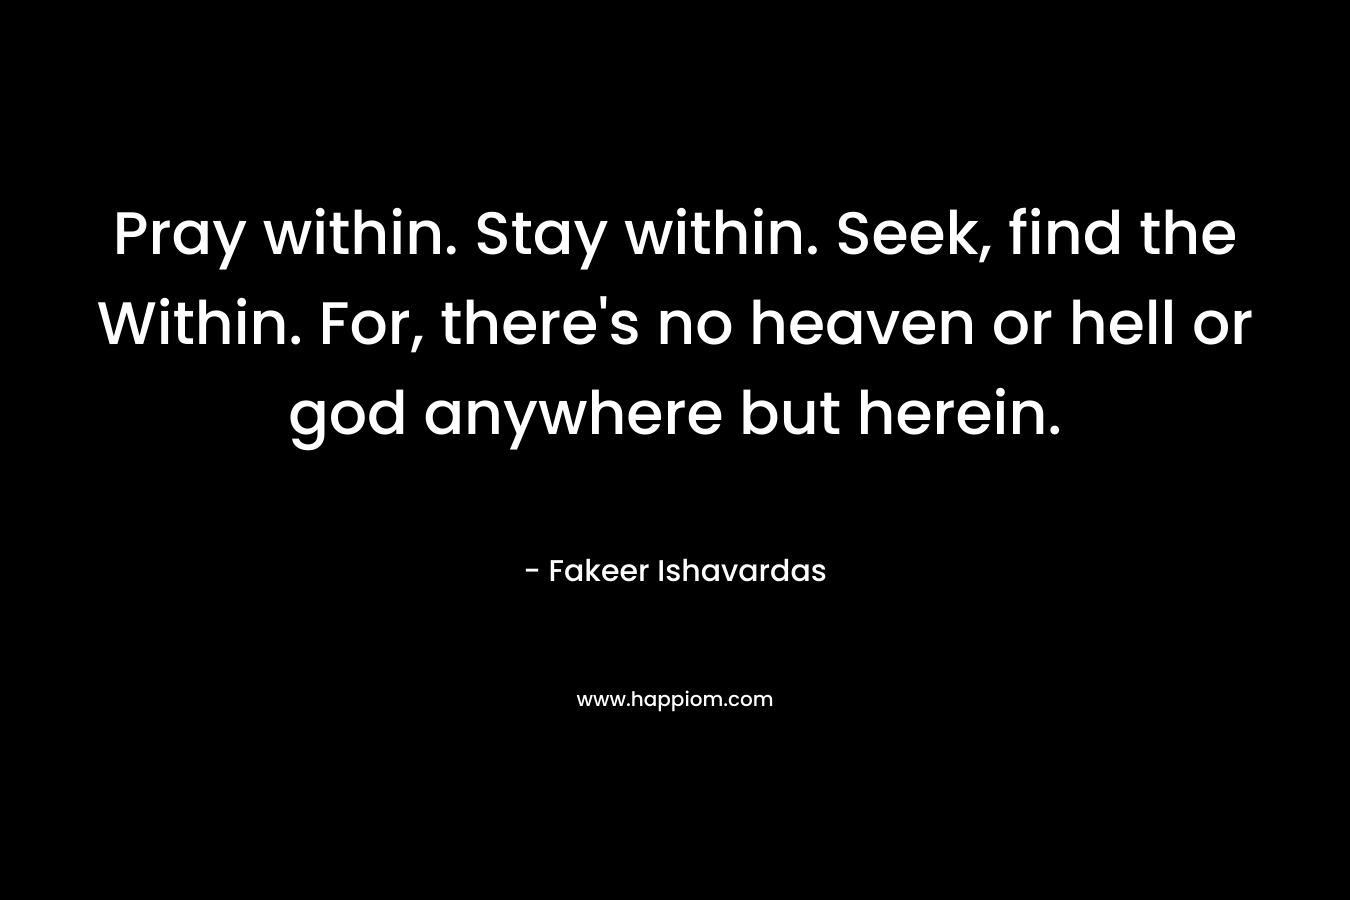 Pray within. Stay within. Seek, find the Within. For, there's no heaven or hell or god anywhere but herein.